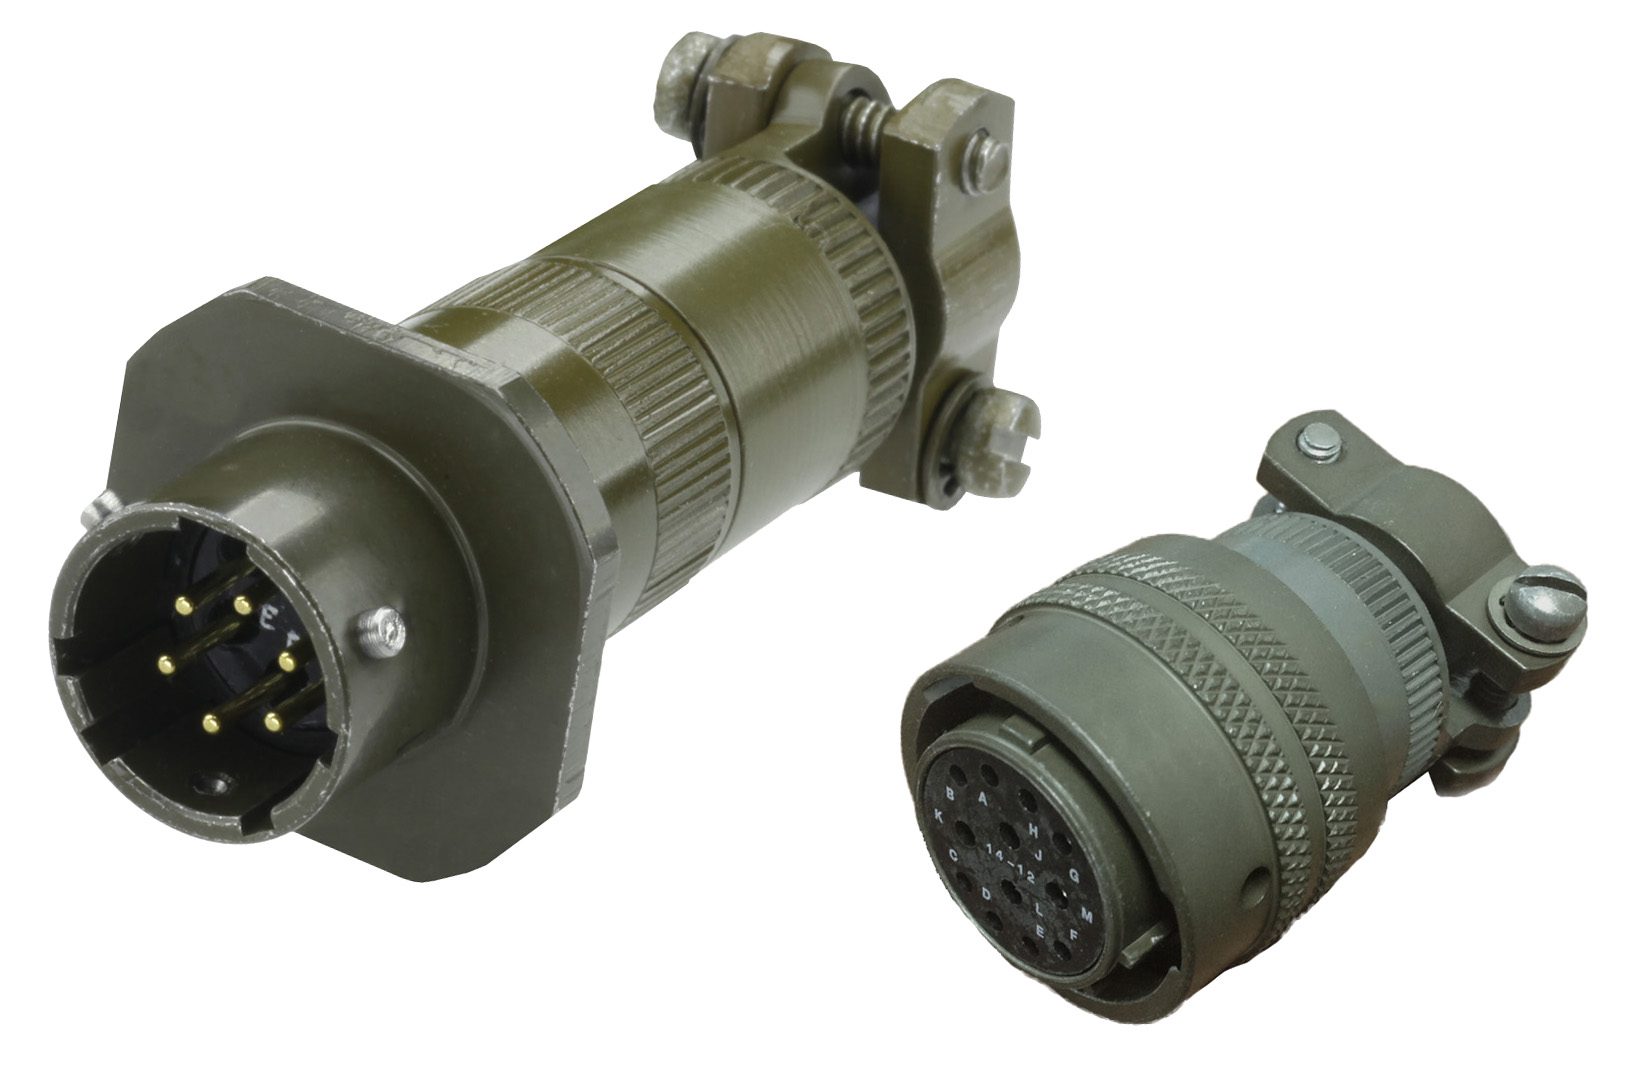 Cinch Connectivity Solutions offers MS3110 through MS3129 and commercial versions of the MIL-DTL-26482 environmentally sealed circular connector. Available in threaded and bayonet coupling with solder, crimp, or pc tail contacts, and in PW, PWF, and PWC series commercial versions.